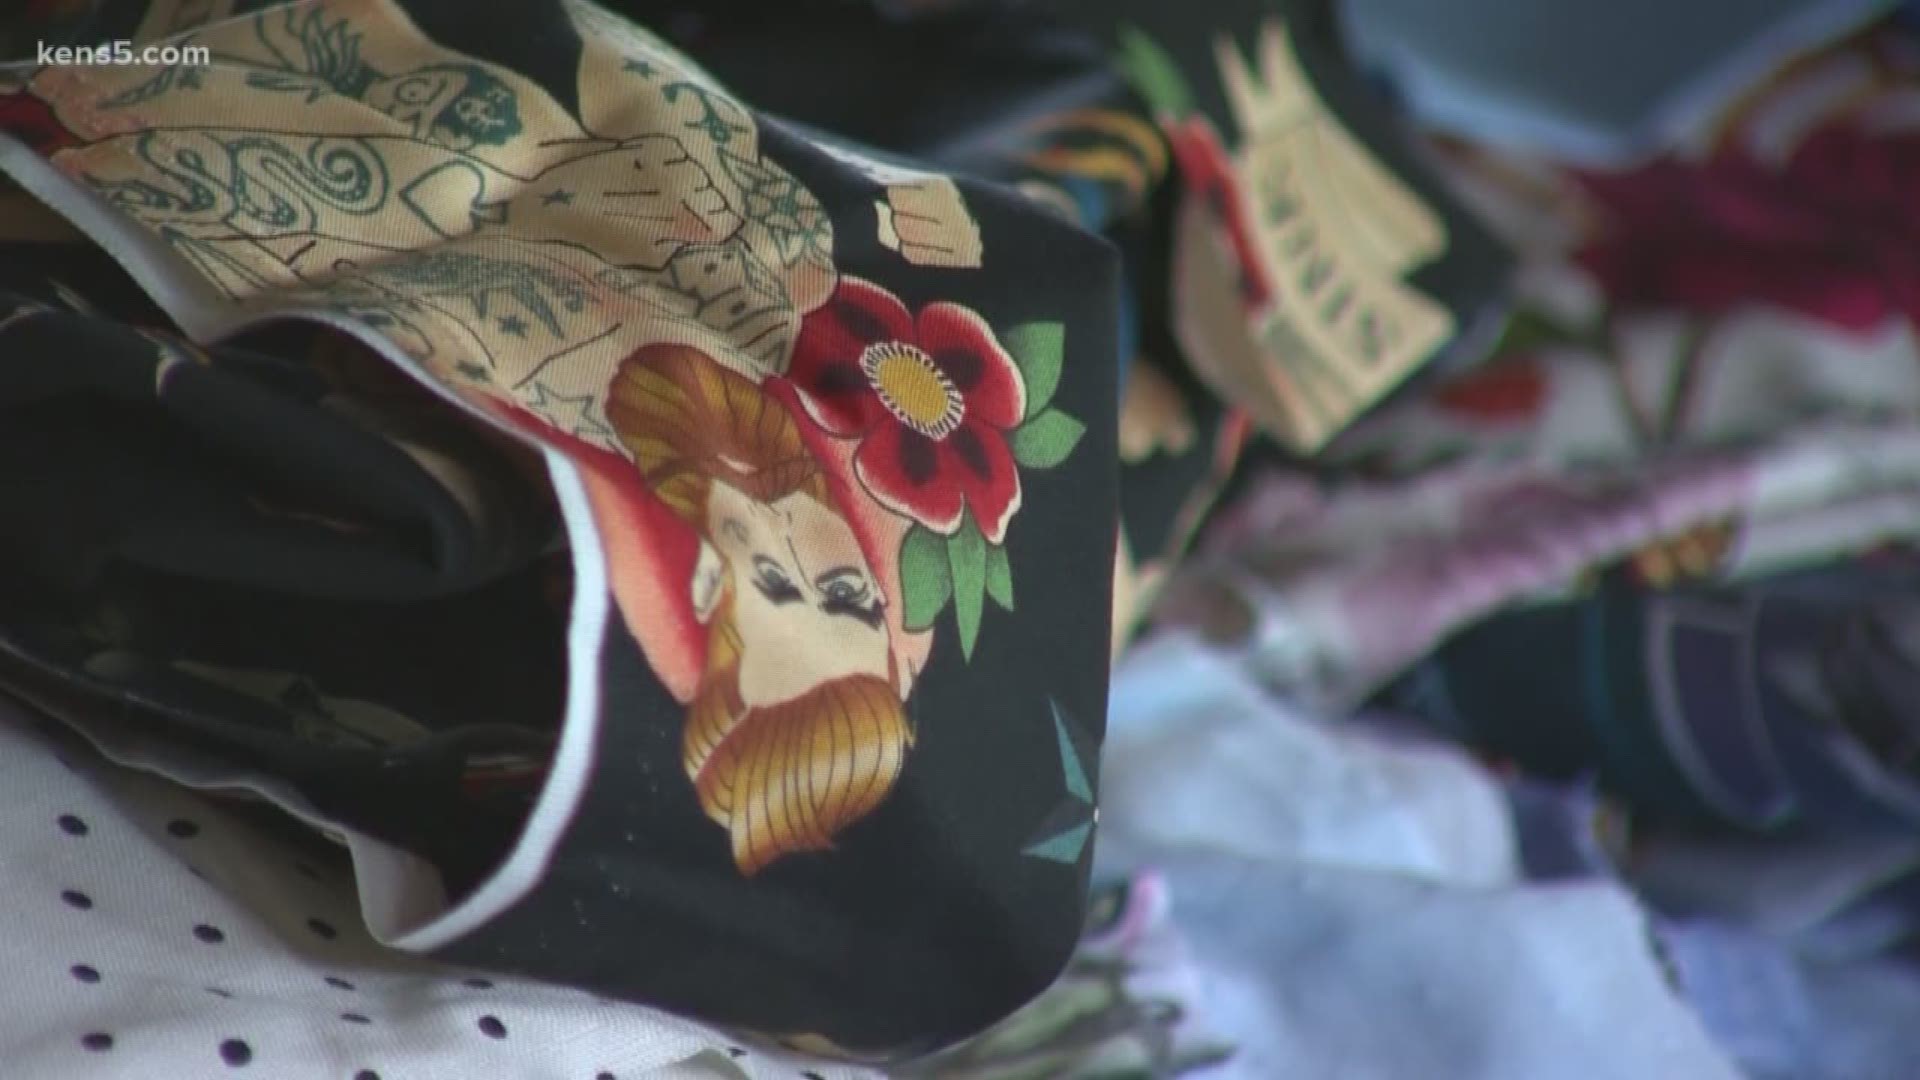 KENS 5's Audrey Castoreno introduces us to a San Antonio designer who is bringing denim, leather and creativity together in his unique men's fashion line.